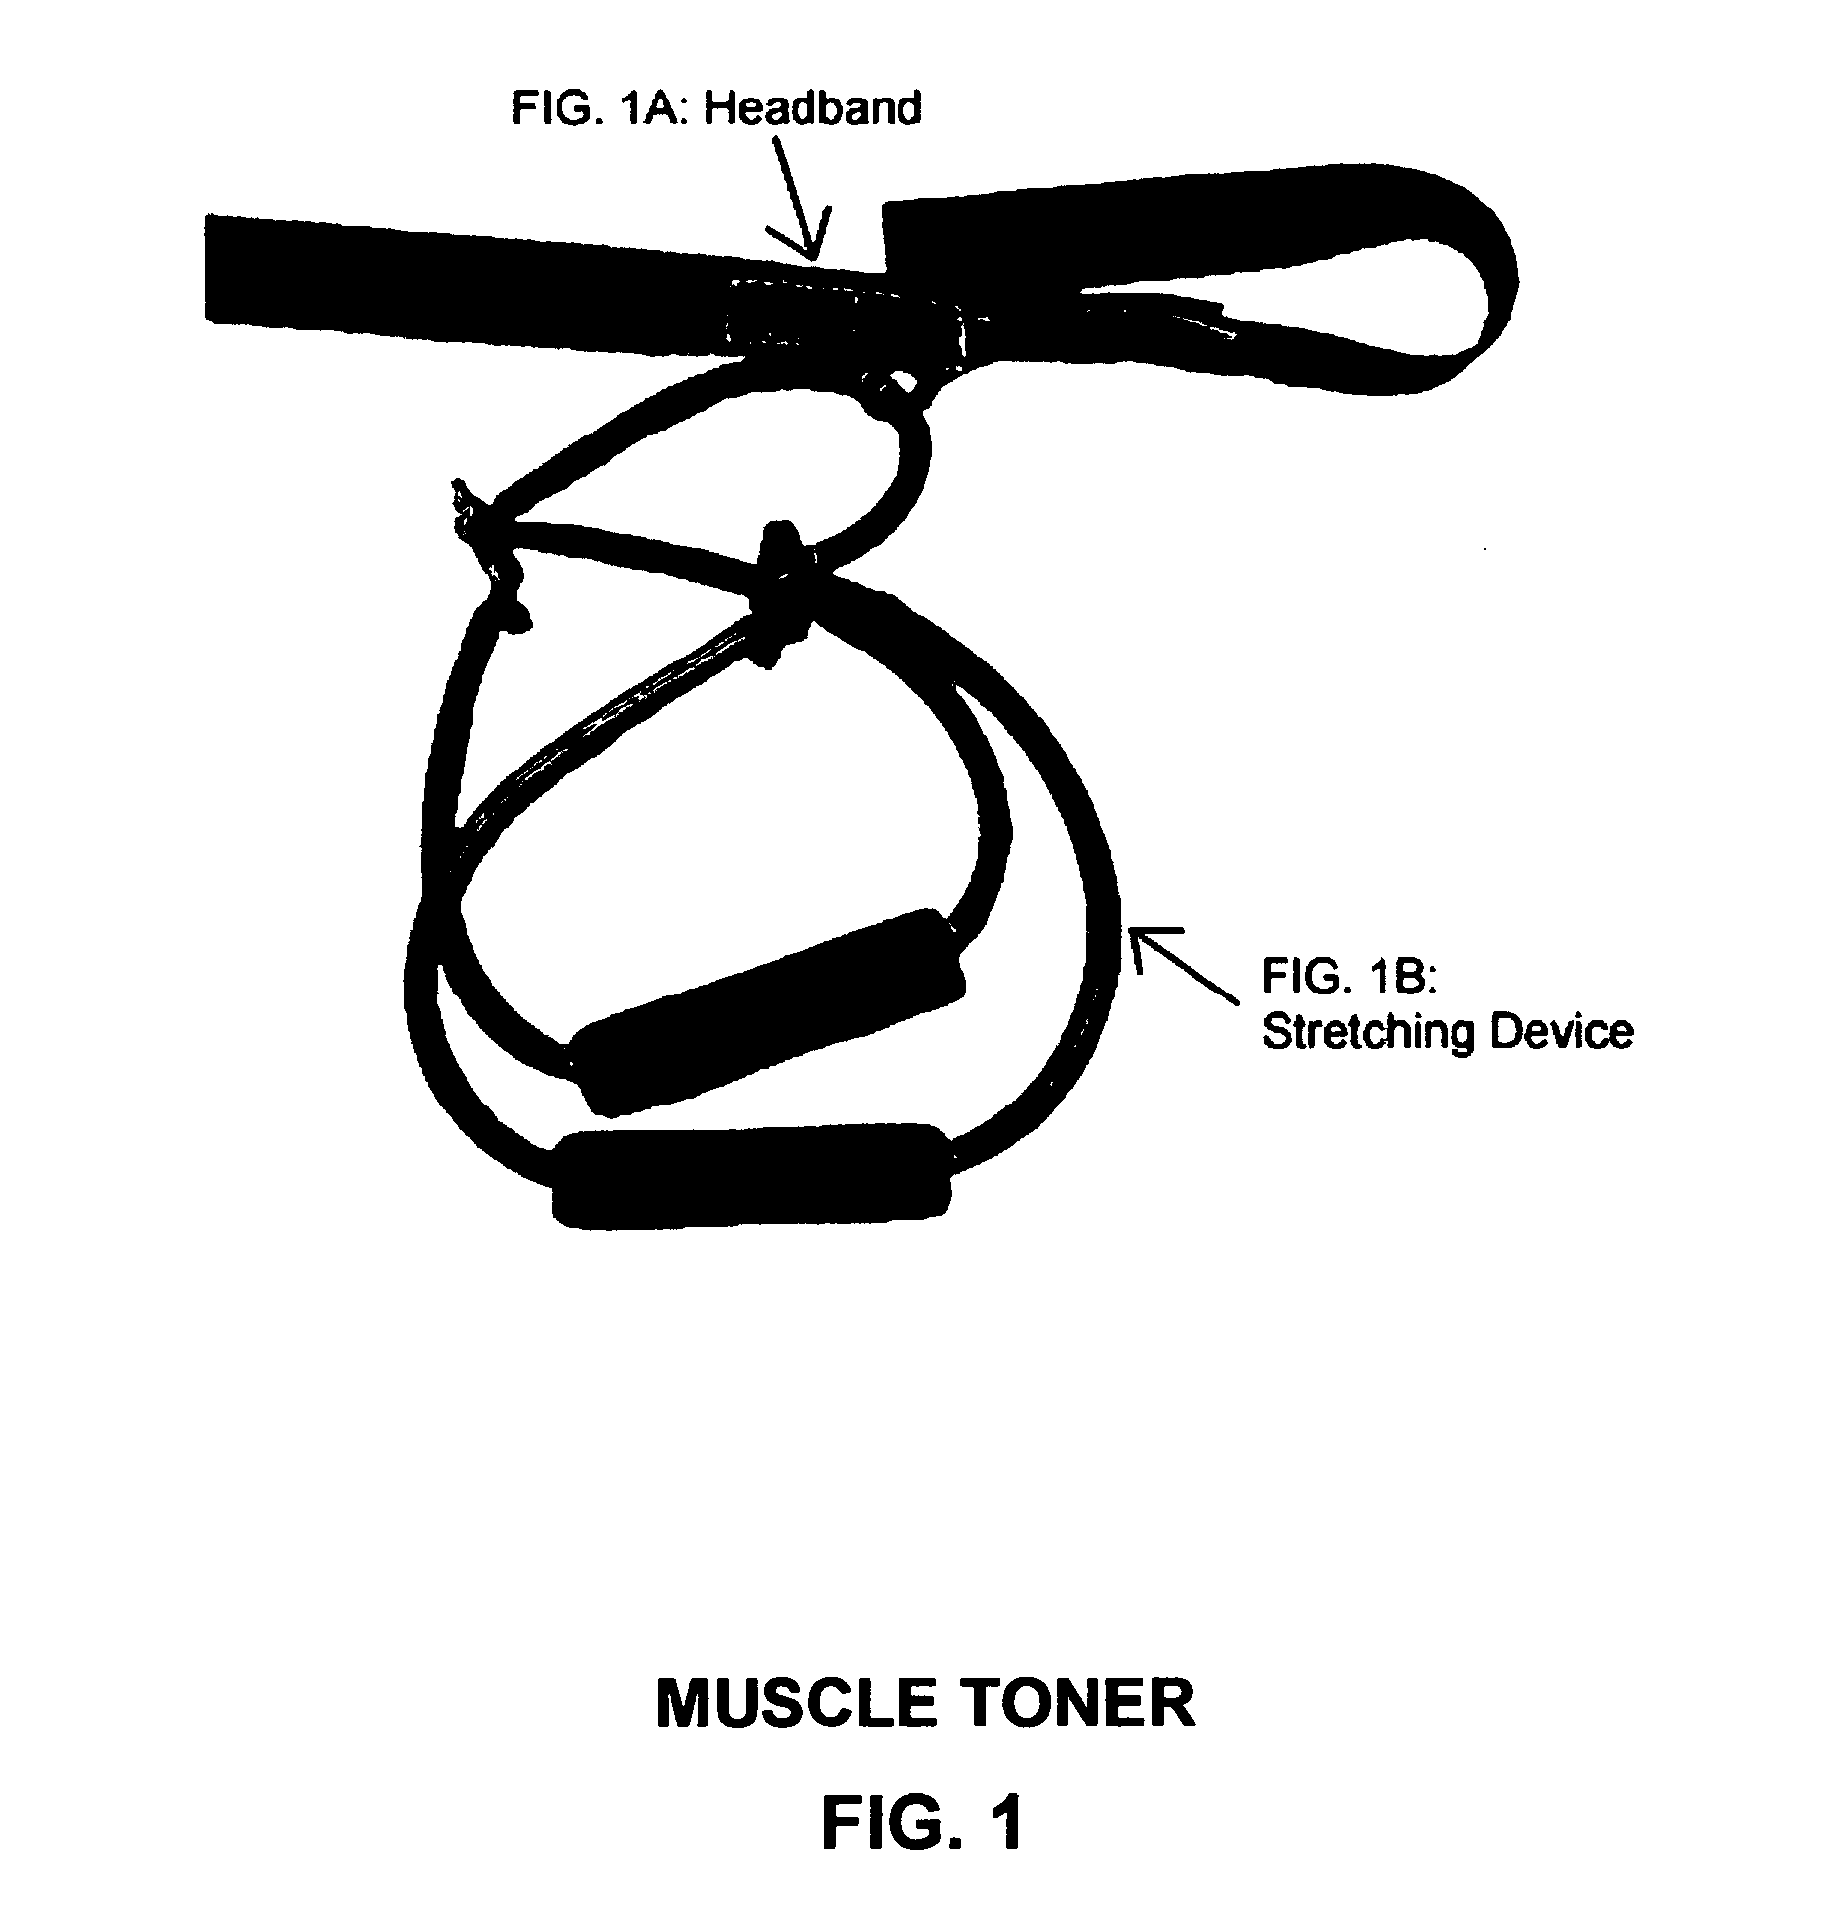 Muscle toner to prevent and treat tension headaches, neck and shoulder pain and snoring